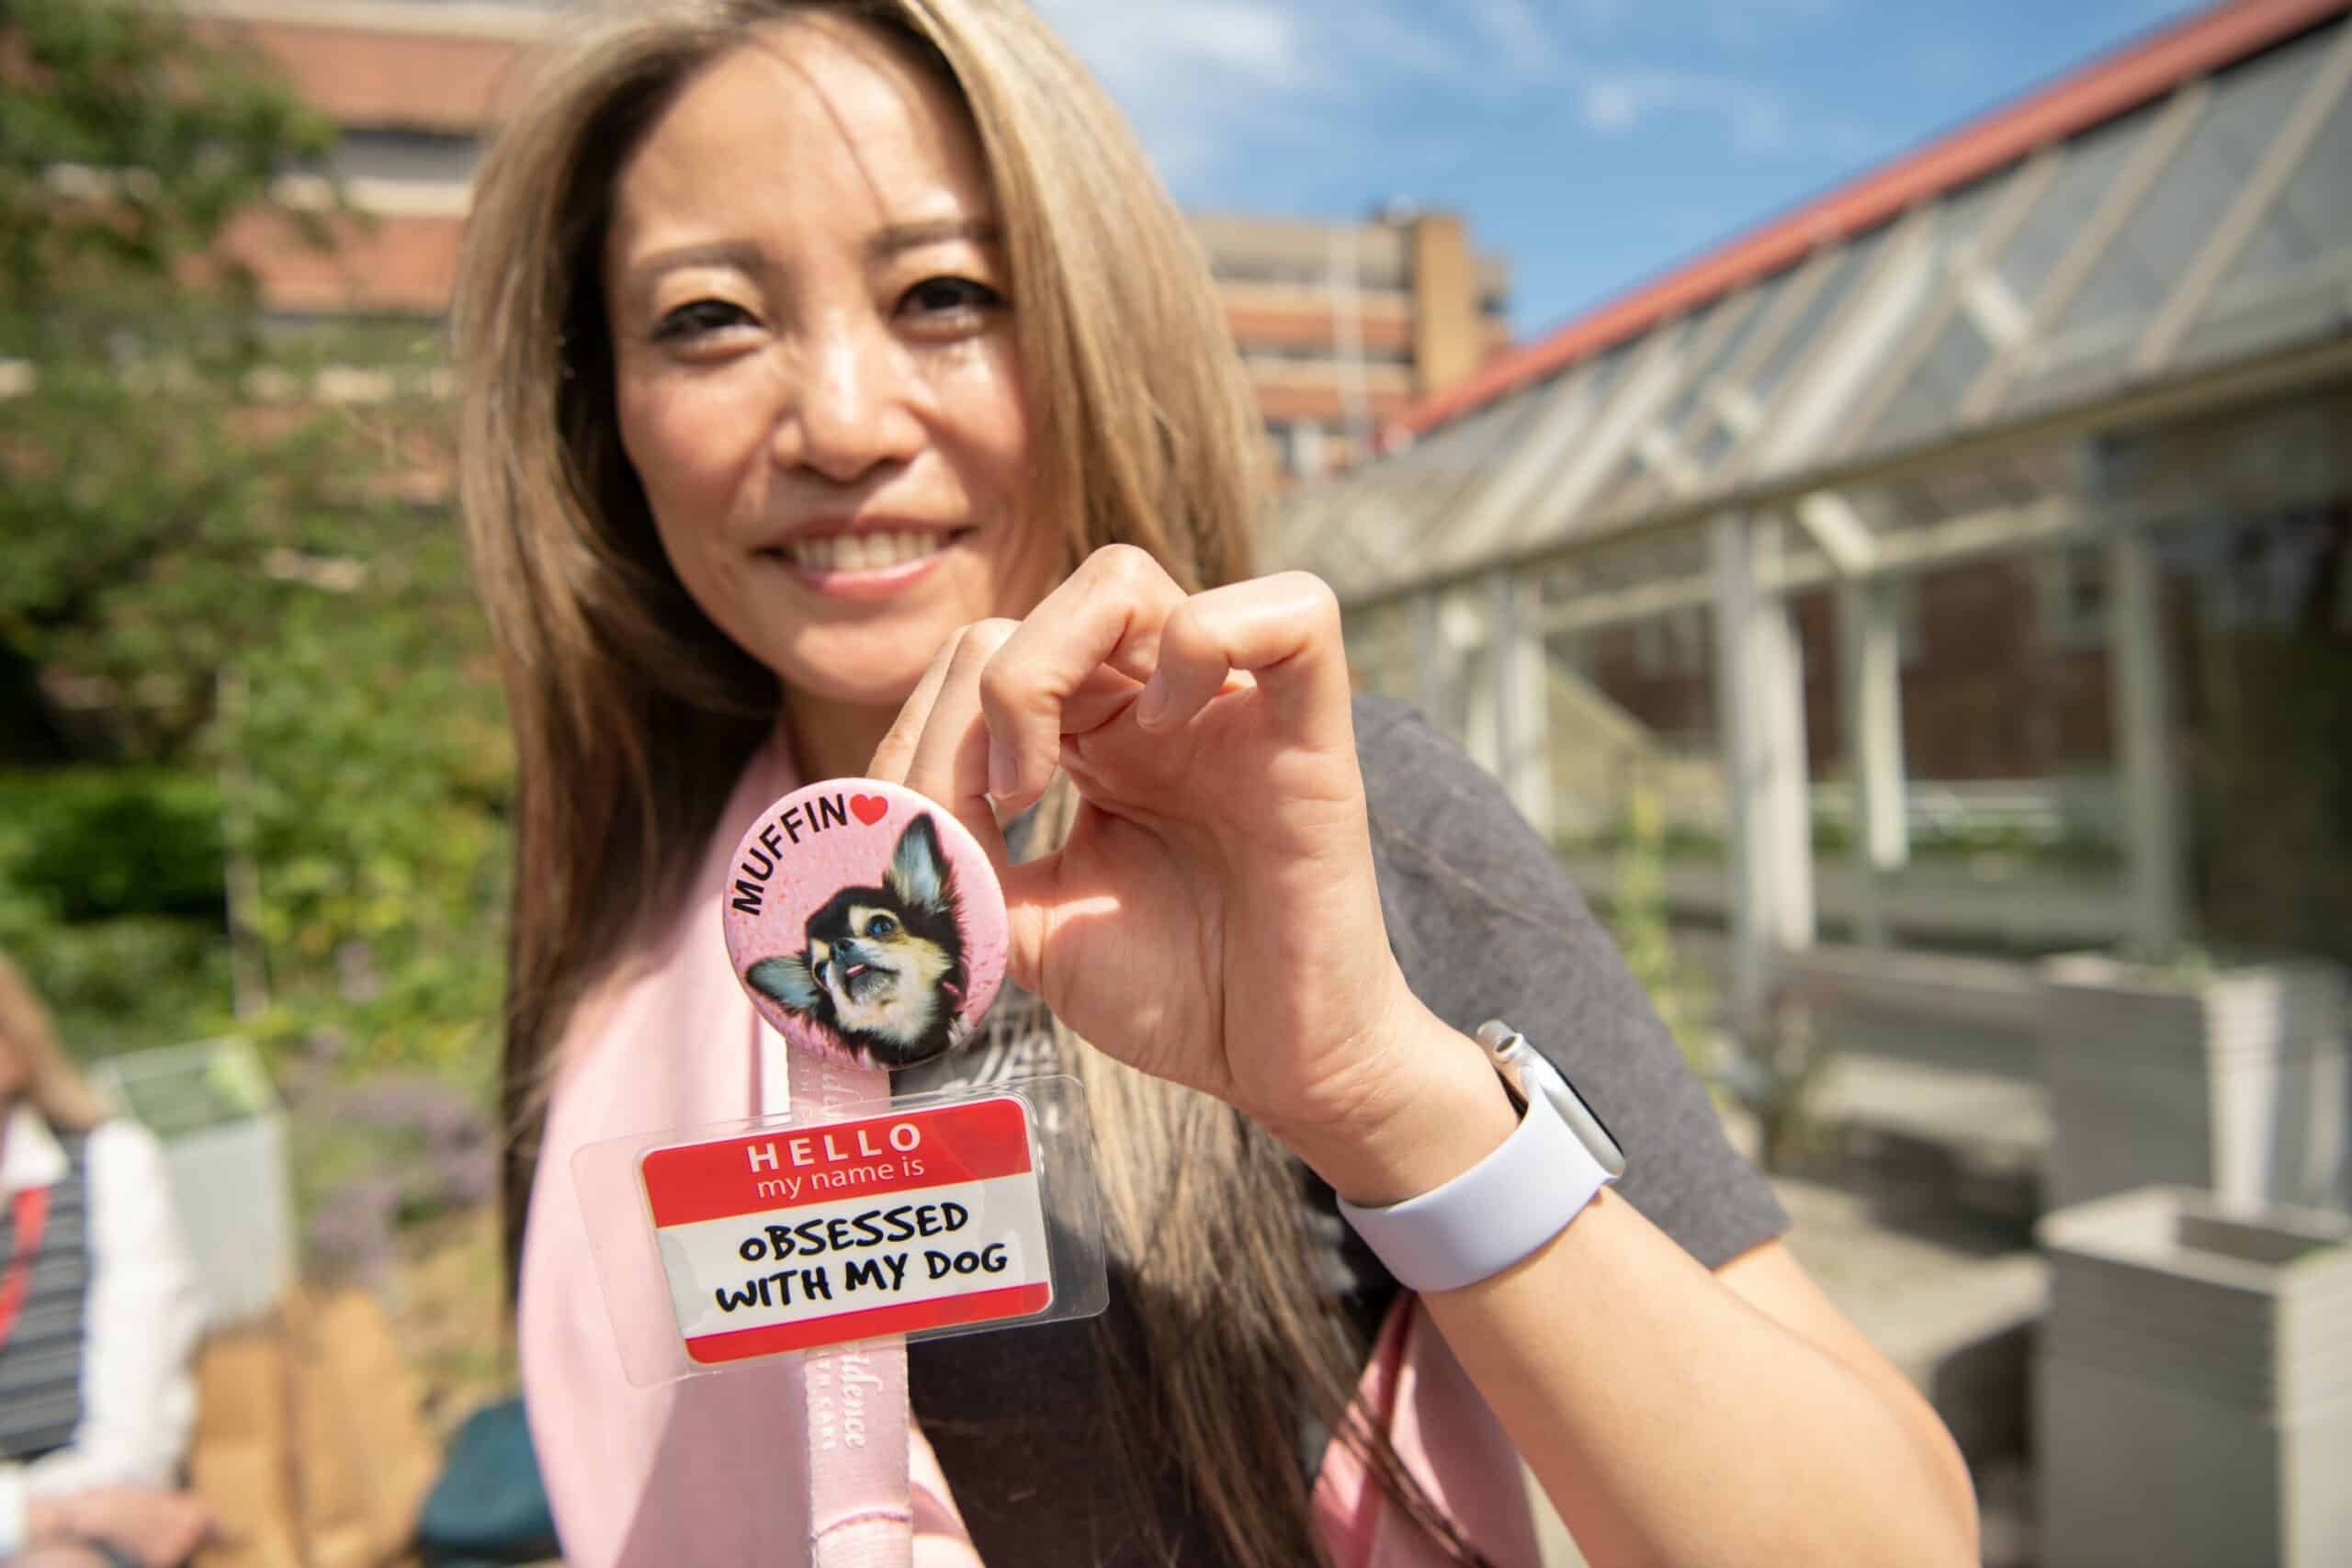 An addiction care support worker proudly showing off her therapy dog's badge.